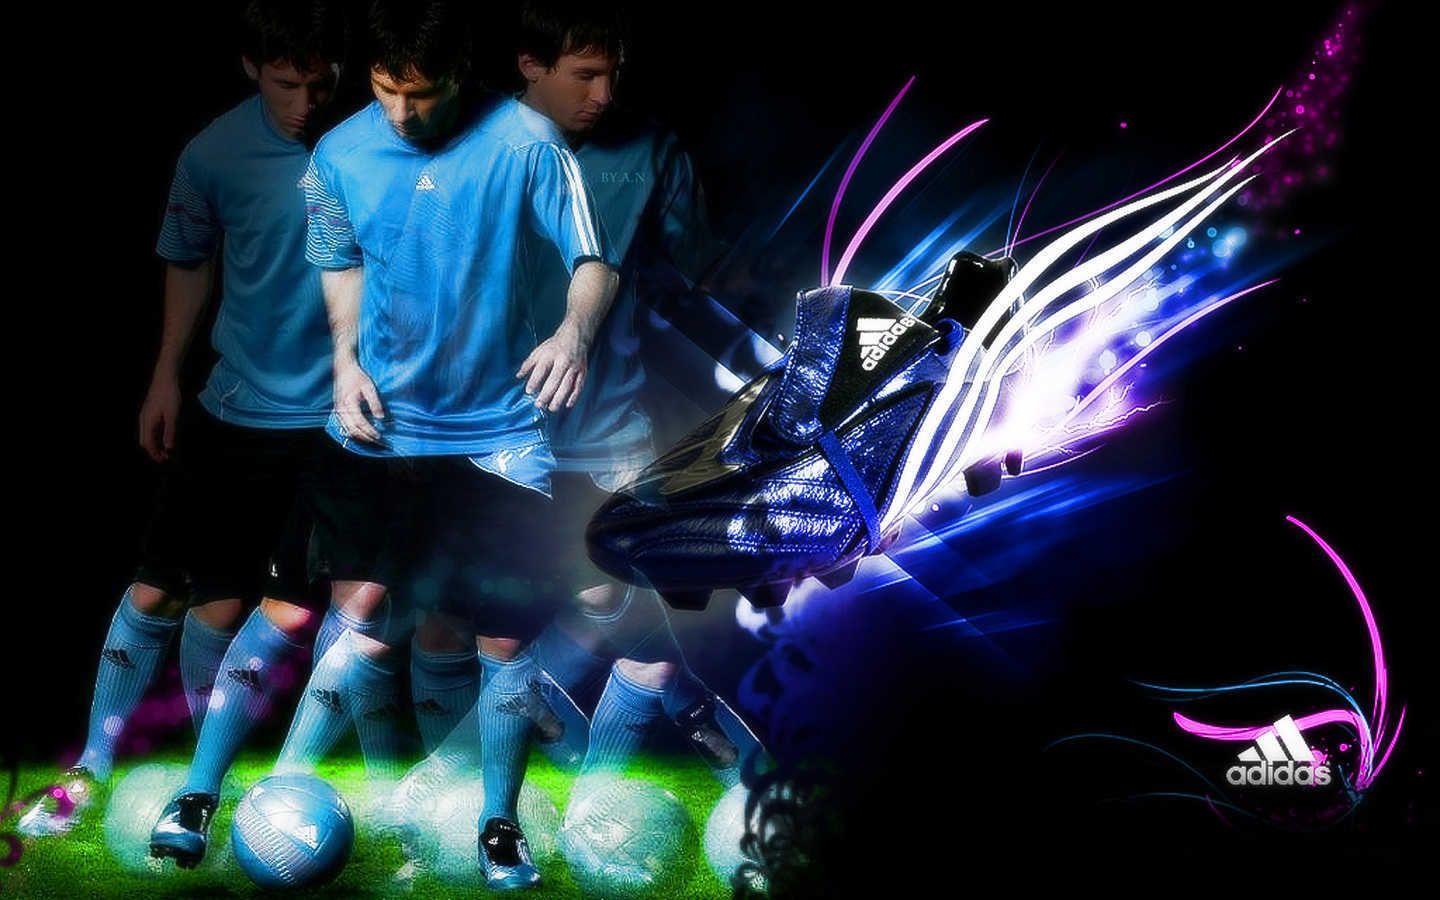 Lionel Messi Adidas Shoe Wallpaper 1440900 Lionel Messi Wallpapers